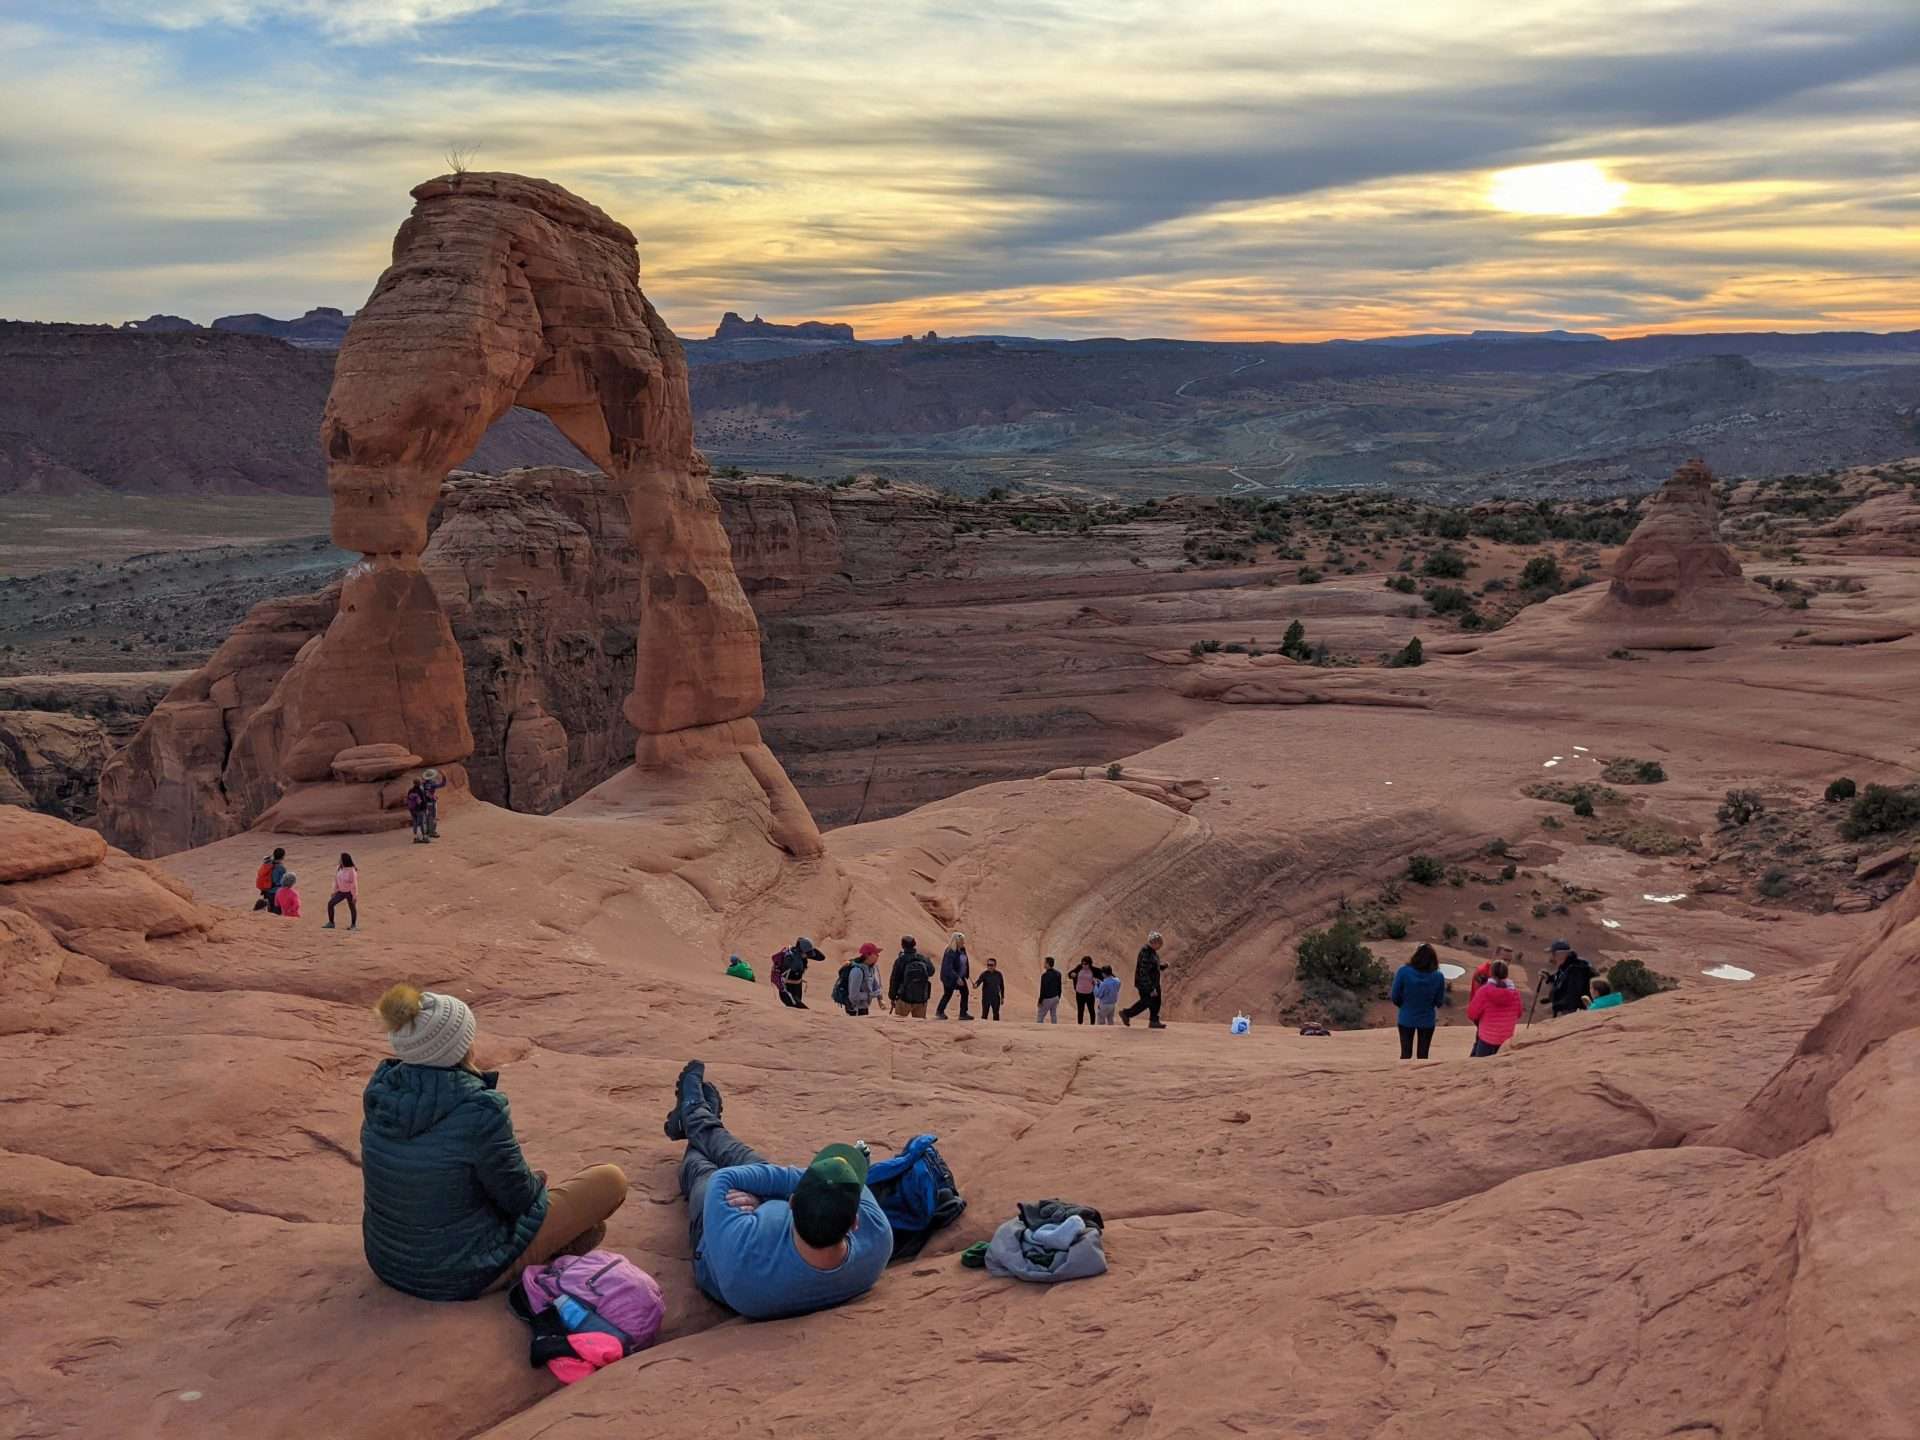 People watching the sunset in Arches National Park